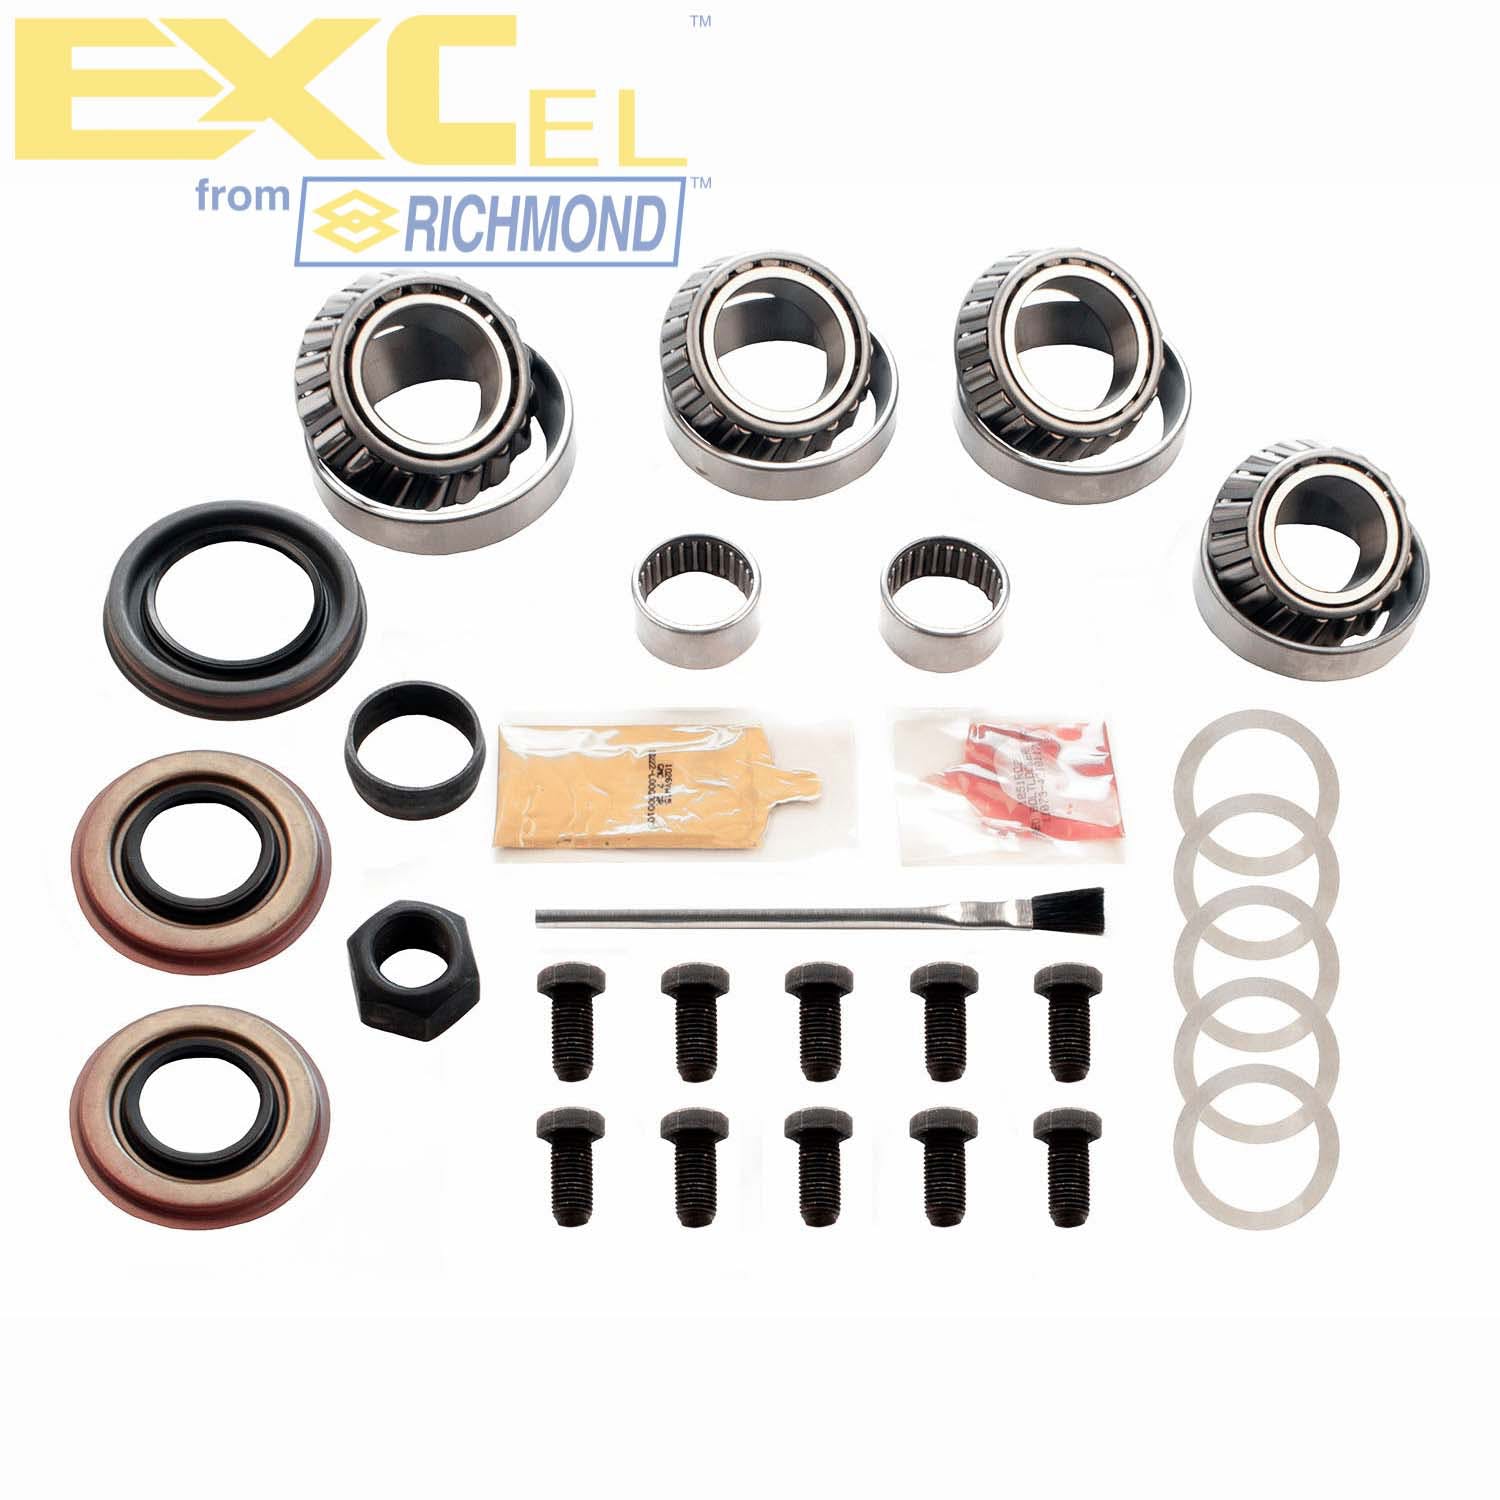 Excel XL-1017-1 Differential Bearing Kit